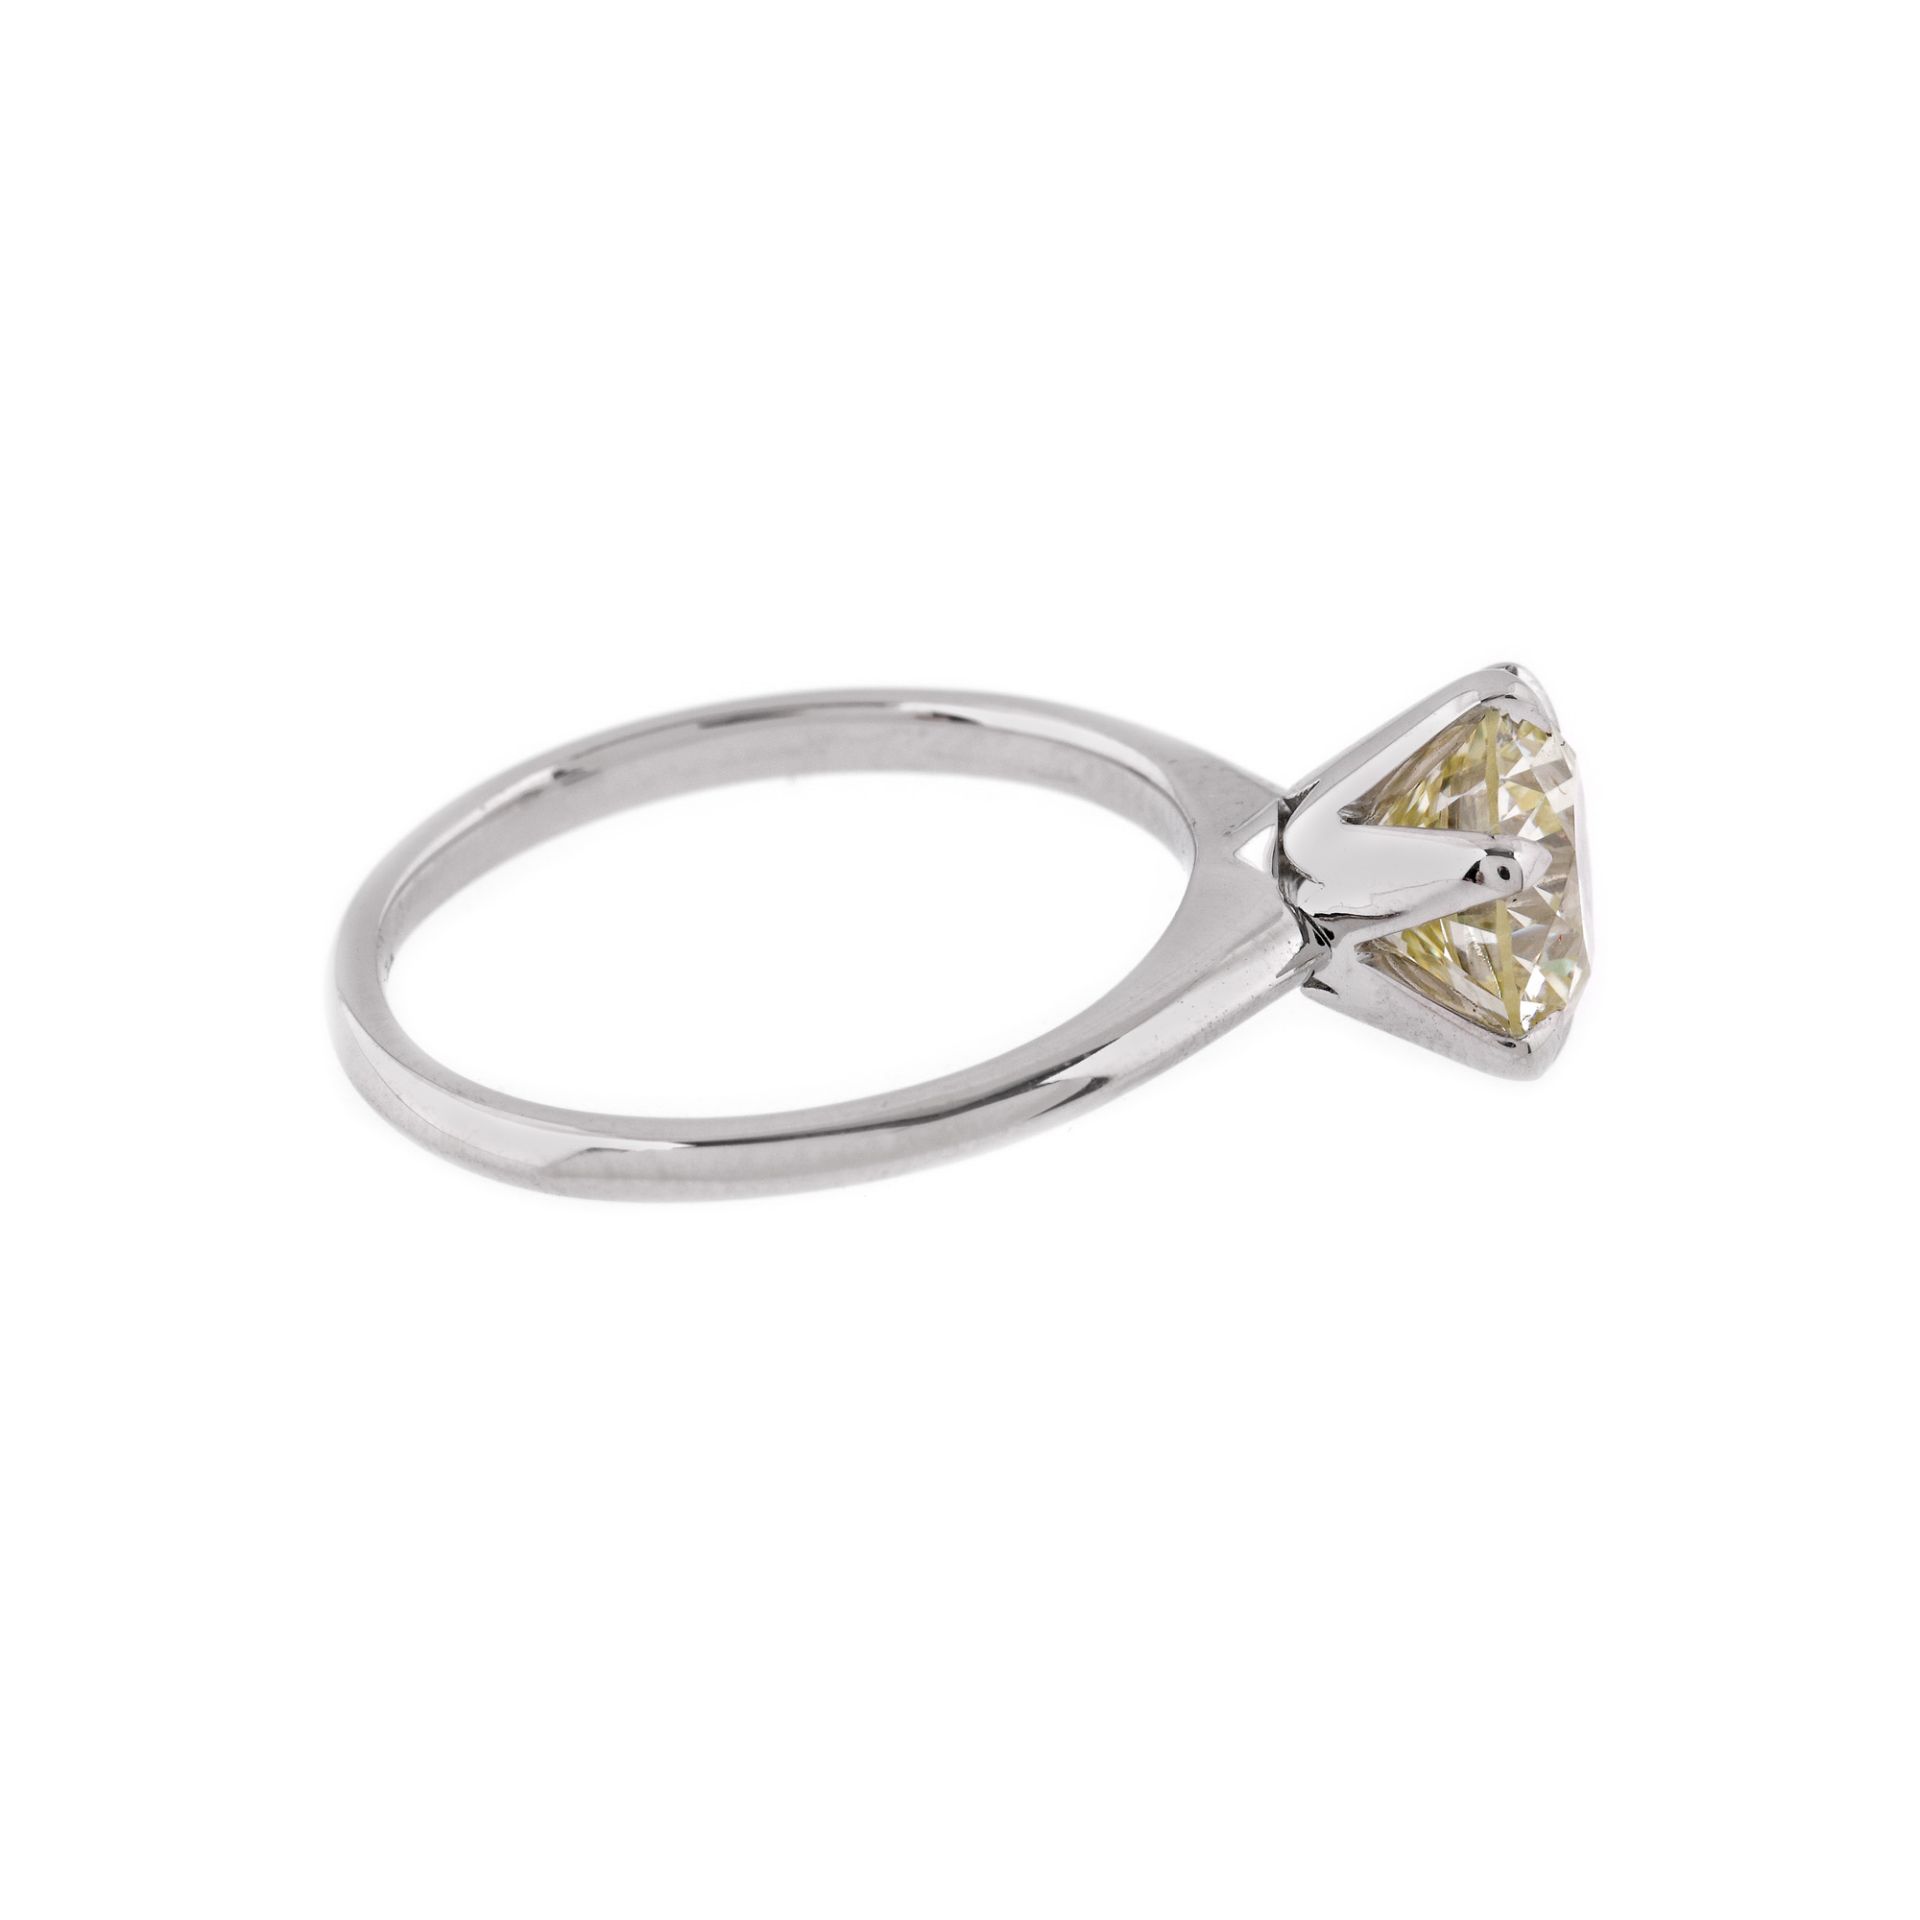 White gold ring, adorned with a solitaire diamond - Image 2 of 3